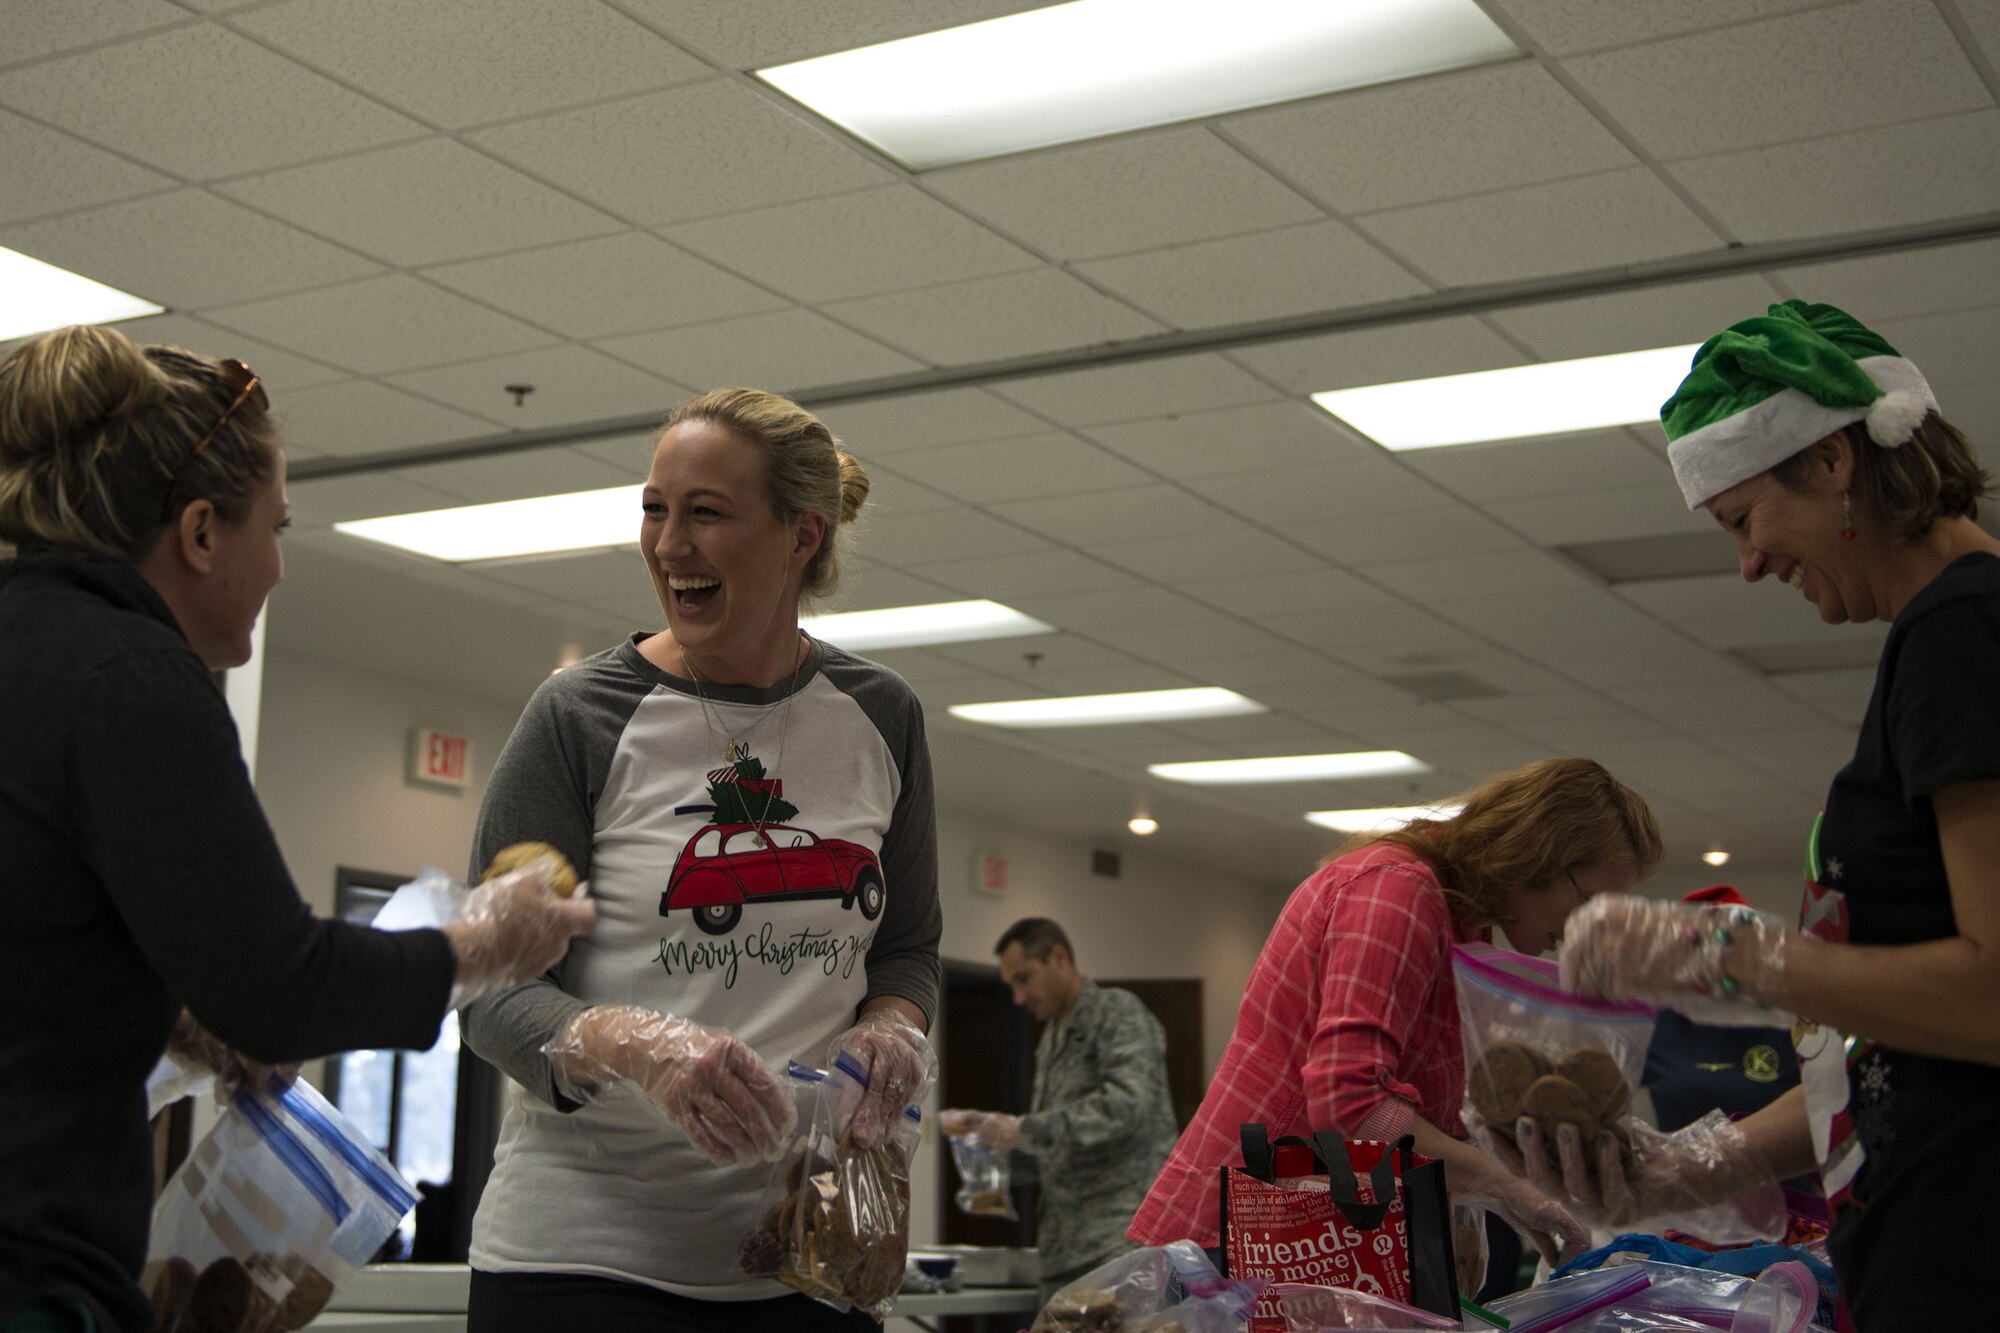 Team Moody spouses share a laugh while packing cookies during the Annual Moody Airmen Cookie Drive, Dec. 4, 2017, at Moody Air Force Base, Ga. Local organizations, Airmen and spouses donated more than 8,000 cookies to approximately 700 dorm residents to show appreciation for the Airmen during the holidays. (U.S. Air Force photo by Airman 1st Class Erick Requadt)